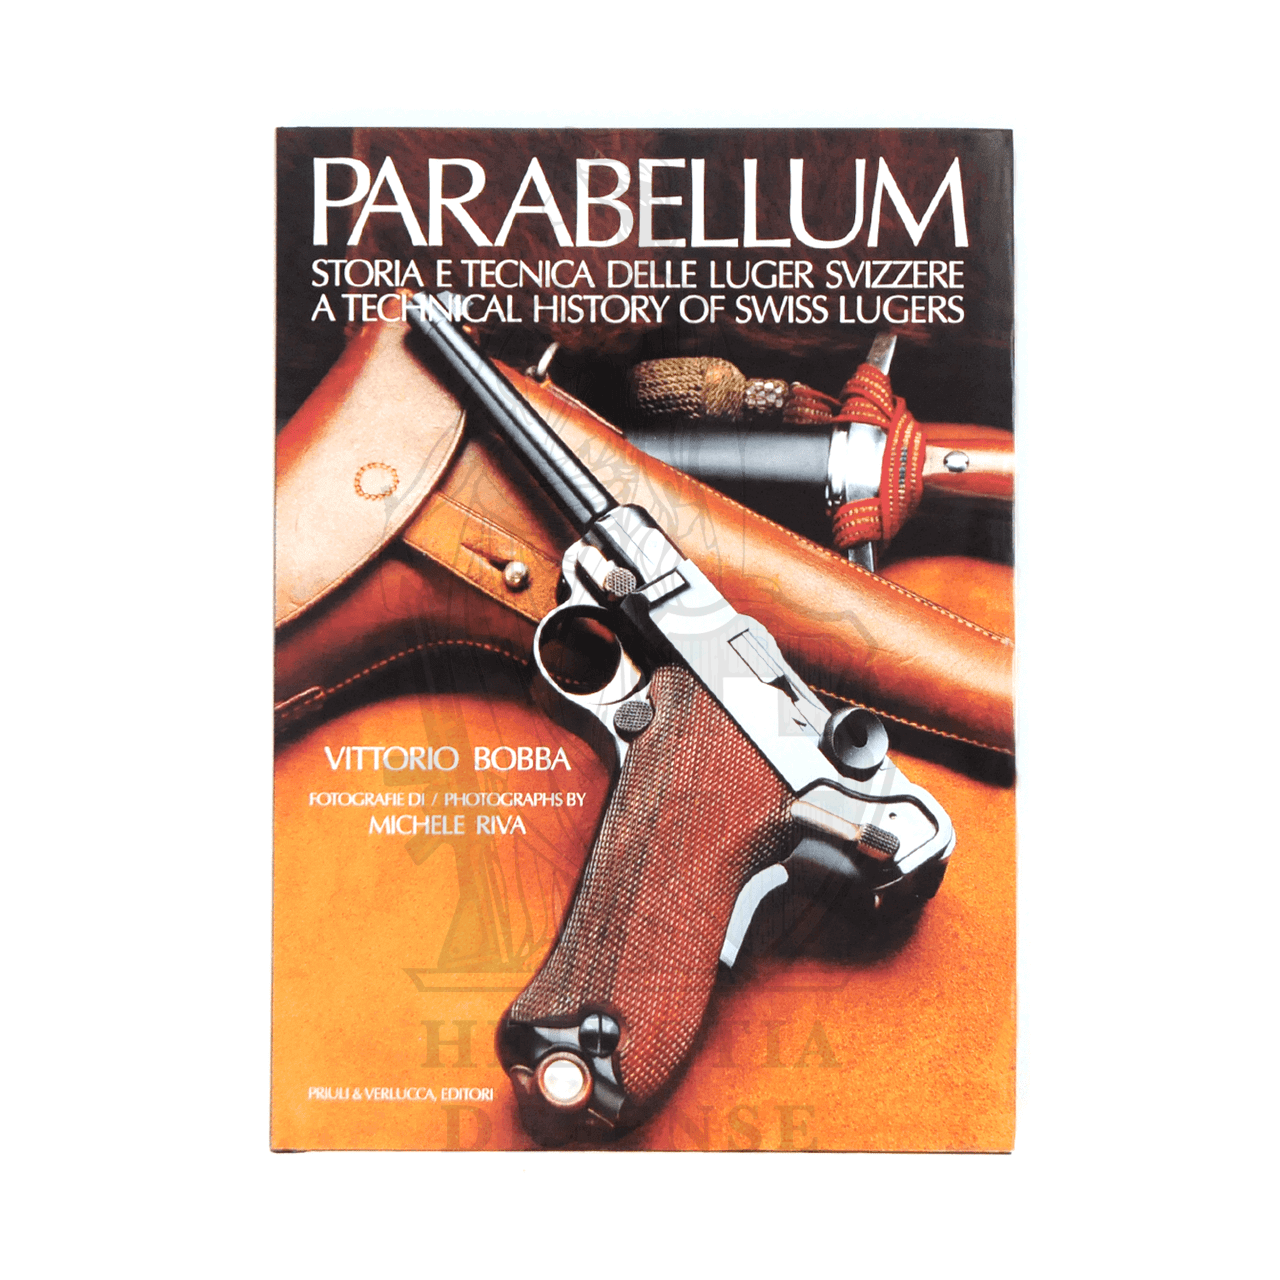 Parabellum - A Technical History of Swiss Lugers